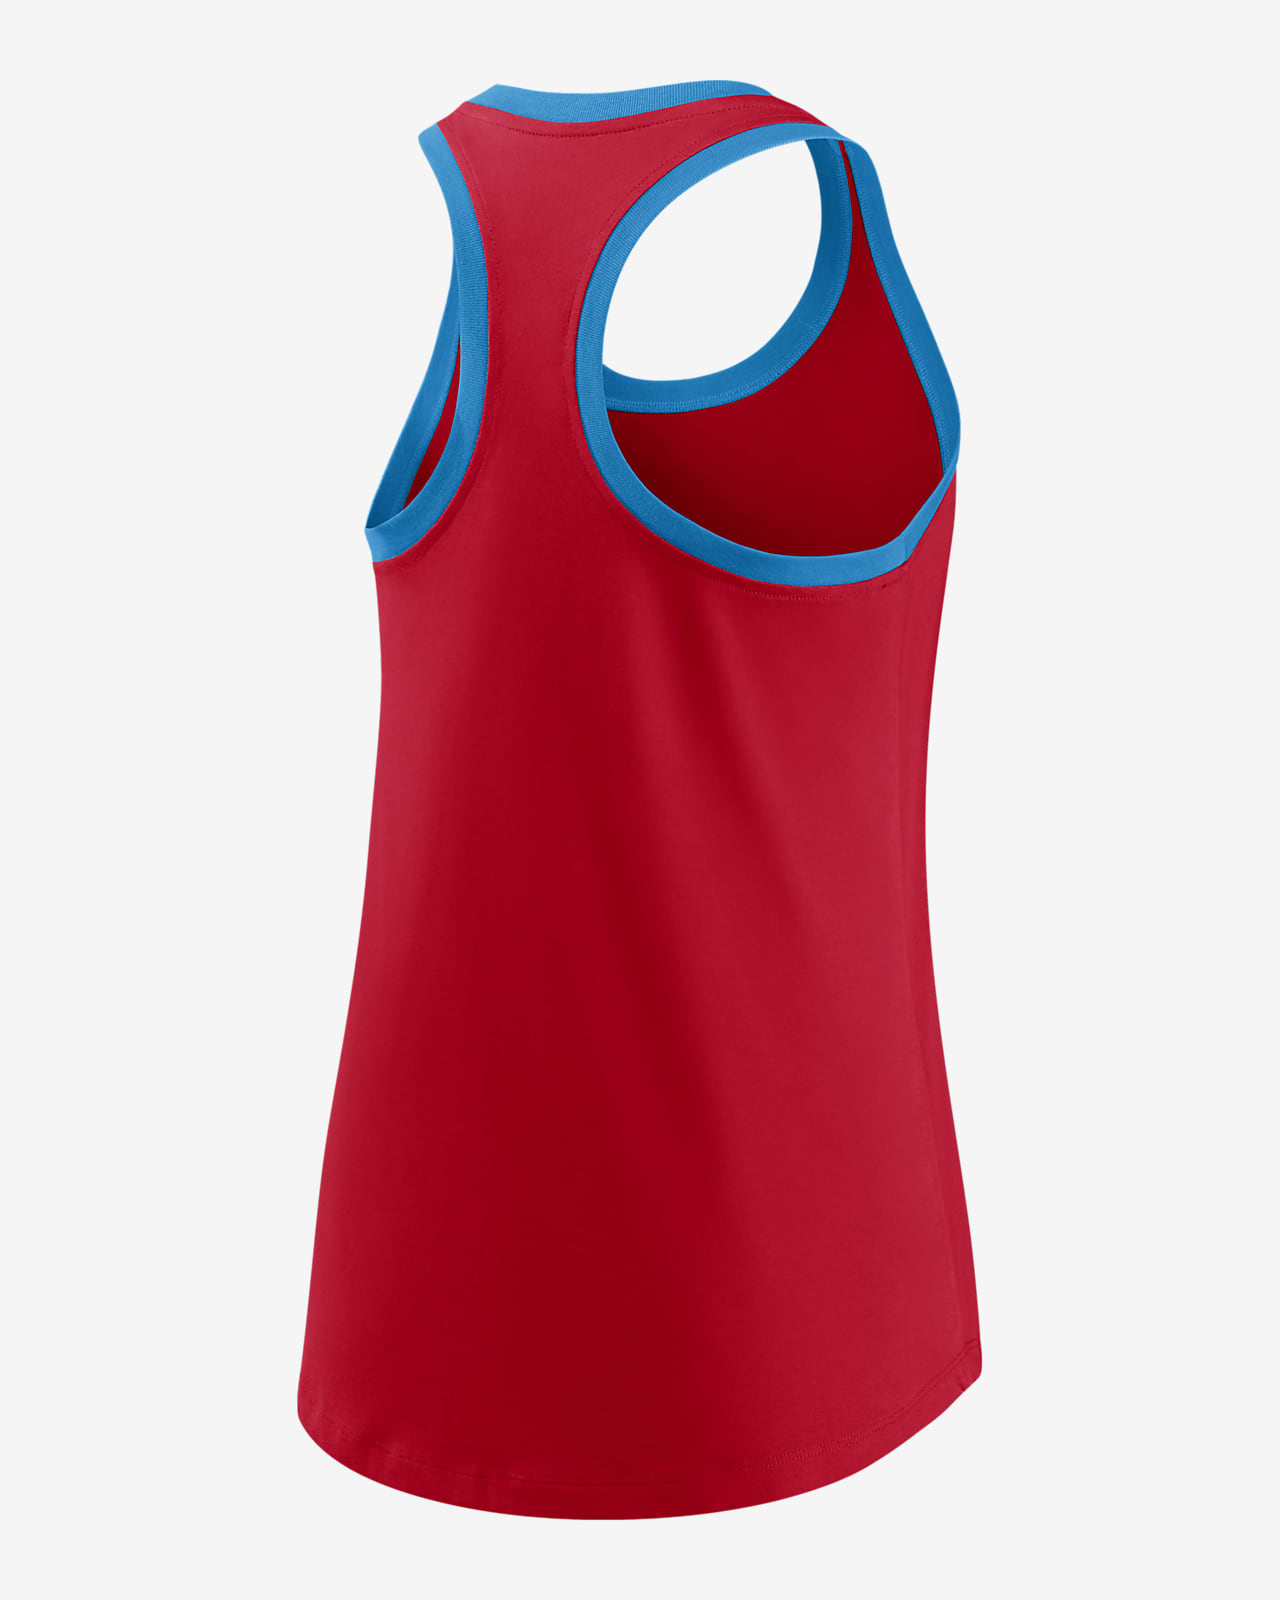 Nike City Connect (MLB Miami Marlins) Women's Racerback Tank Top